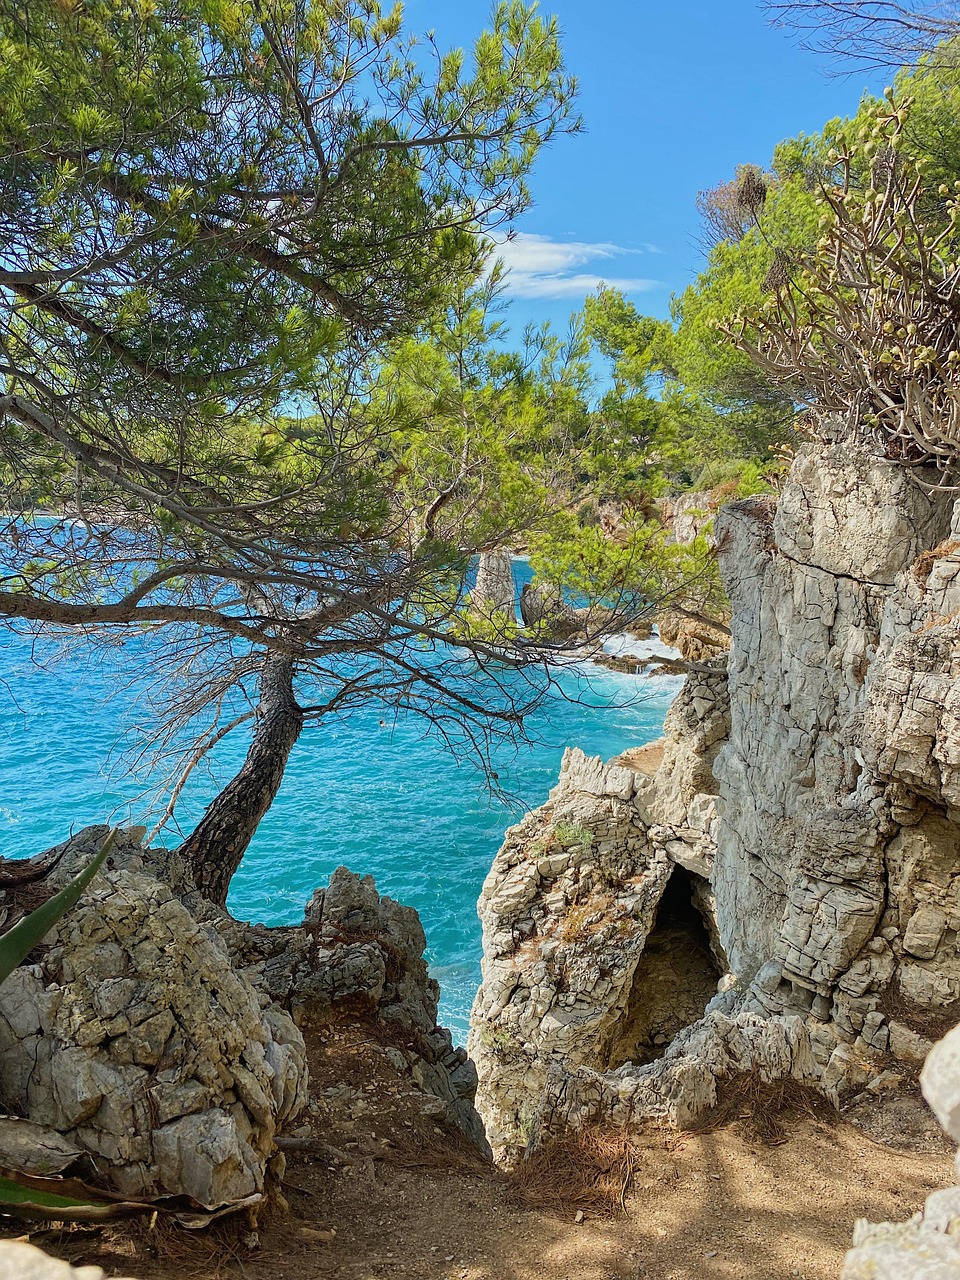 Luxury Escape to Cap d'Antibes: Seaside Bliss and Gastronomic Delights